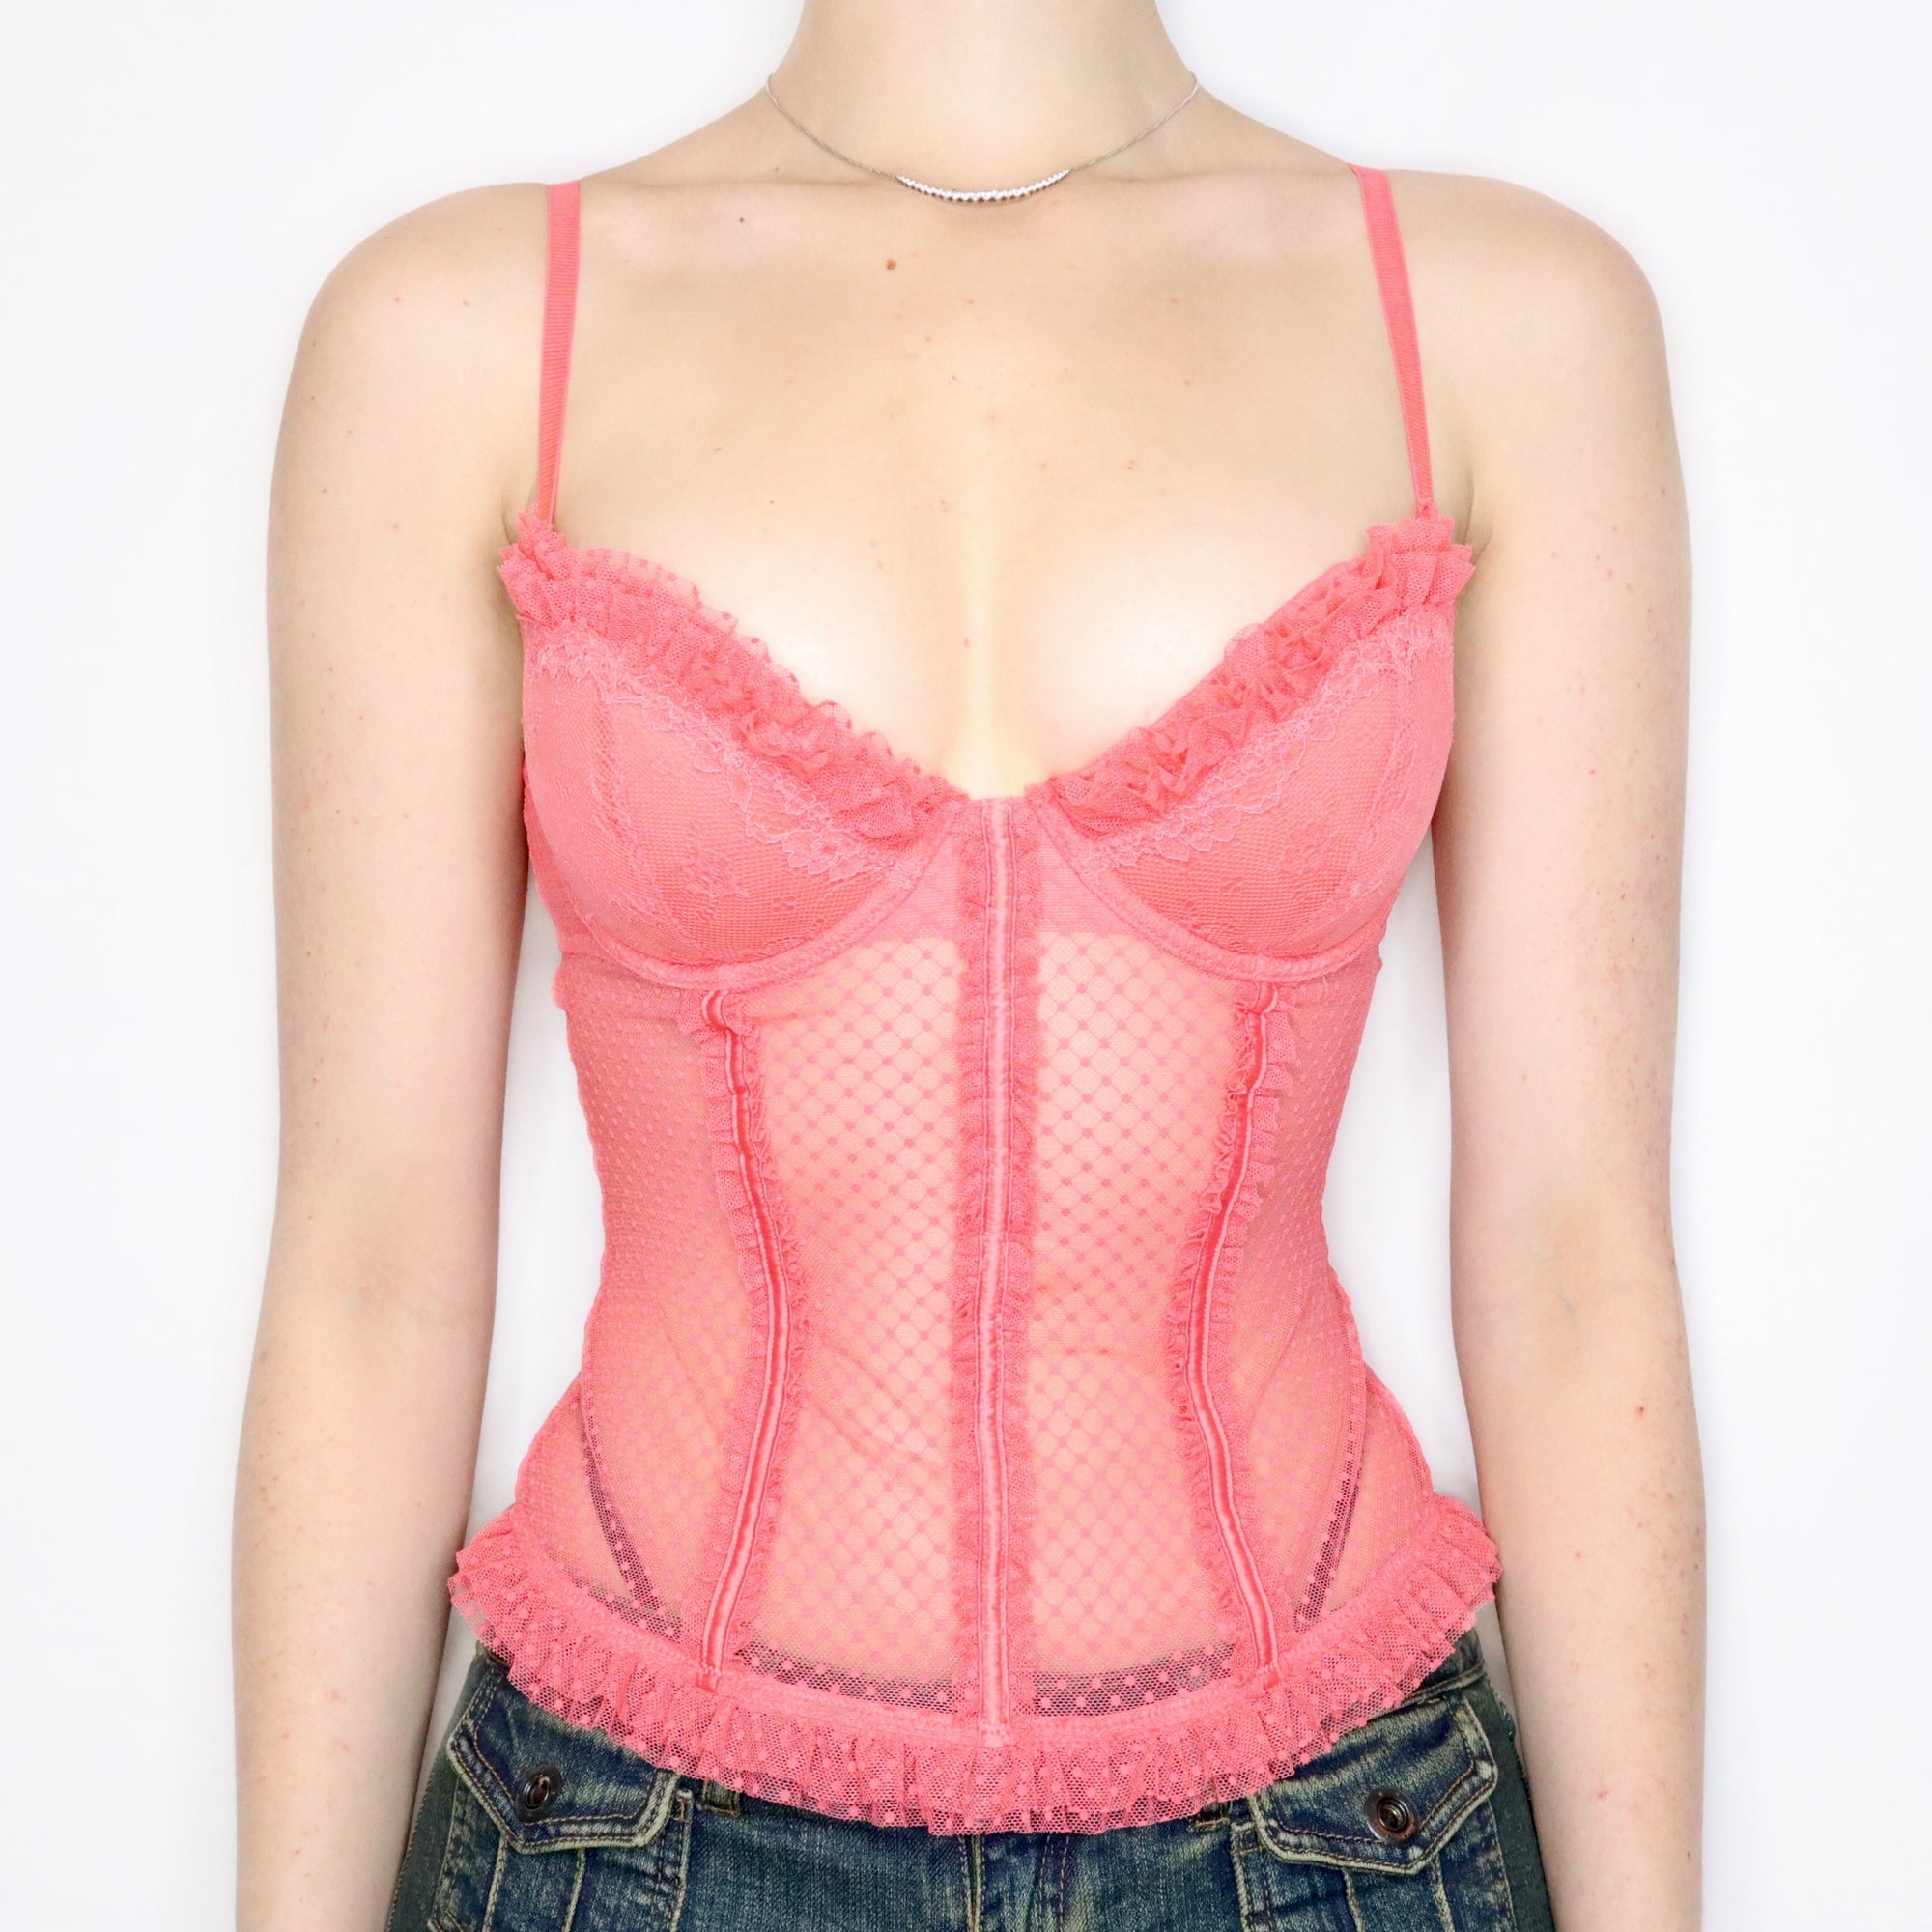 Vintage Early 2000s Guava Pink Mesh Bustier